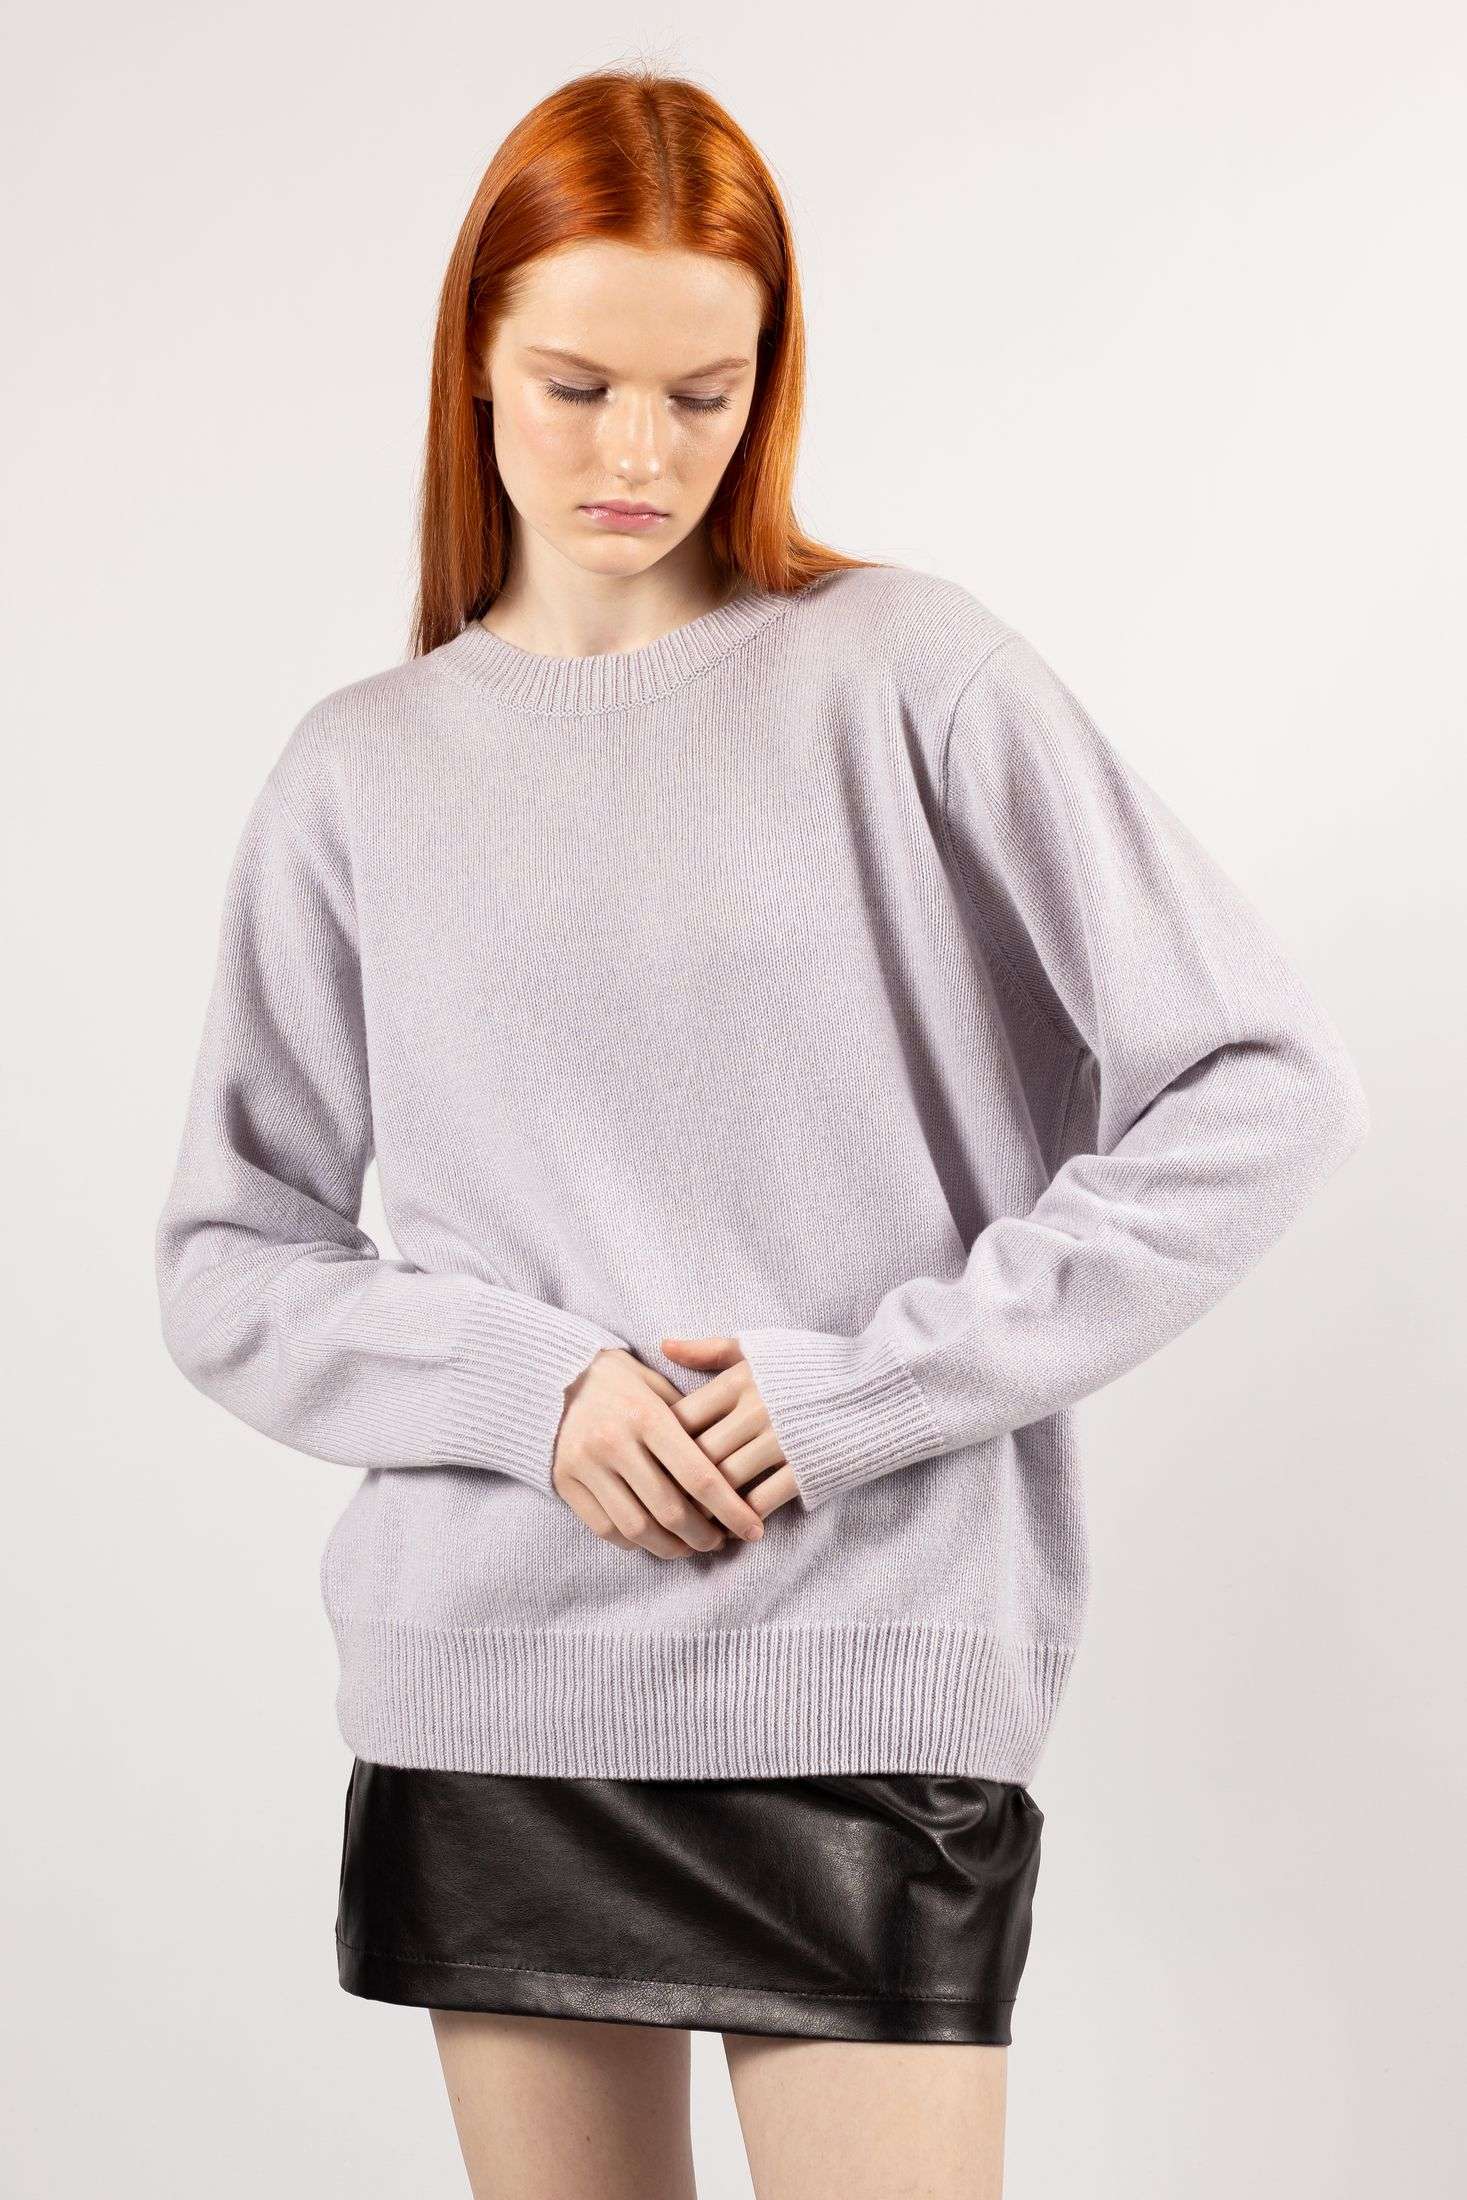 Dive into cozy chic fashion with the must-have Frida Blue pale blue knit sweater.